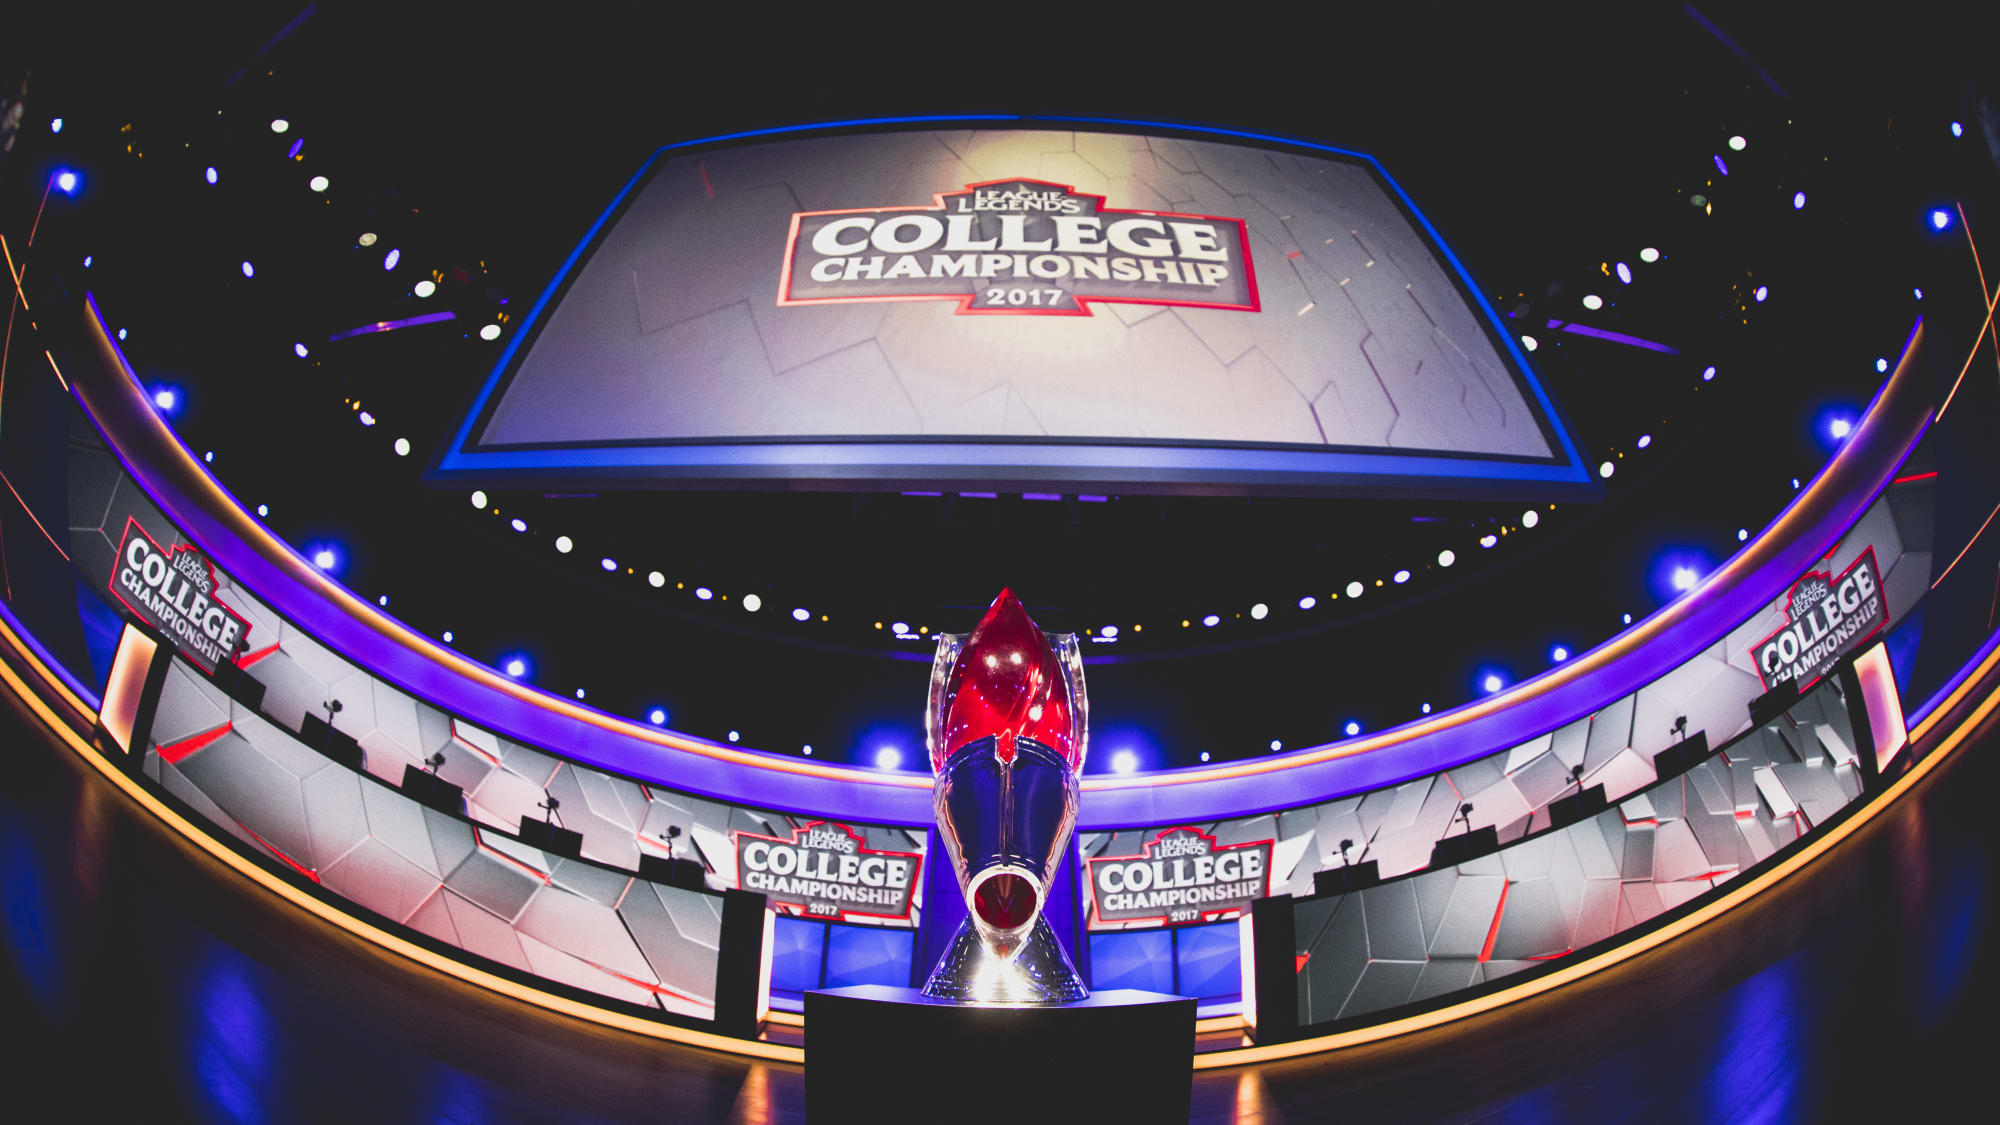 League of Legends University of Toronto heads to College Championship